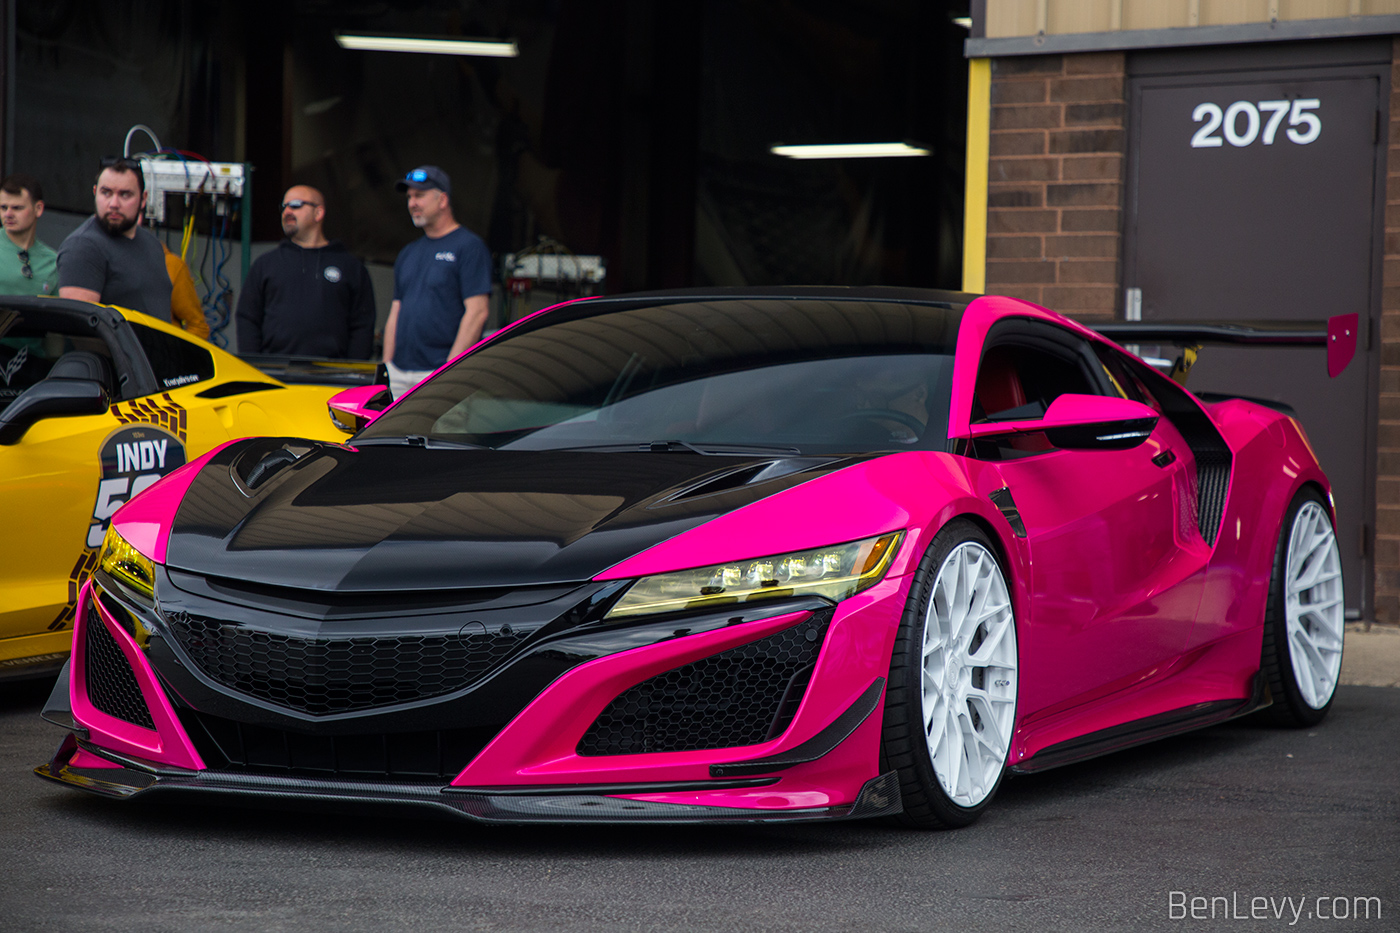 Acura NSX wrapped in Pink and Black